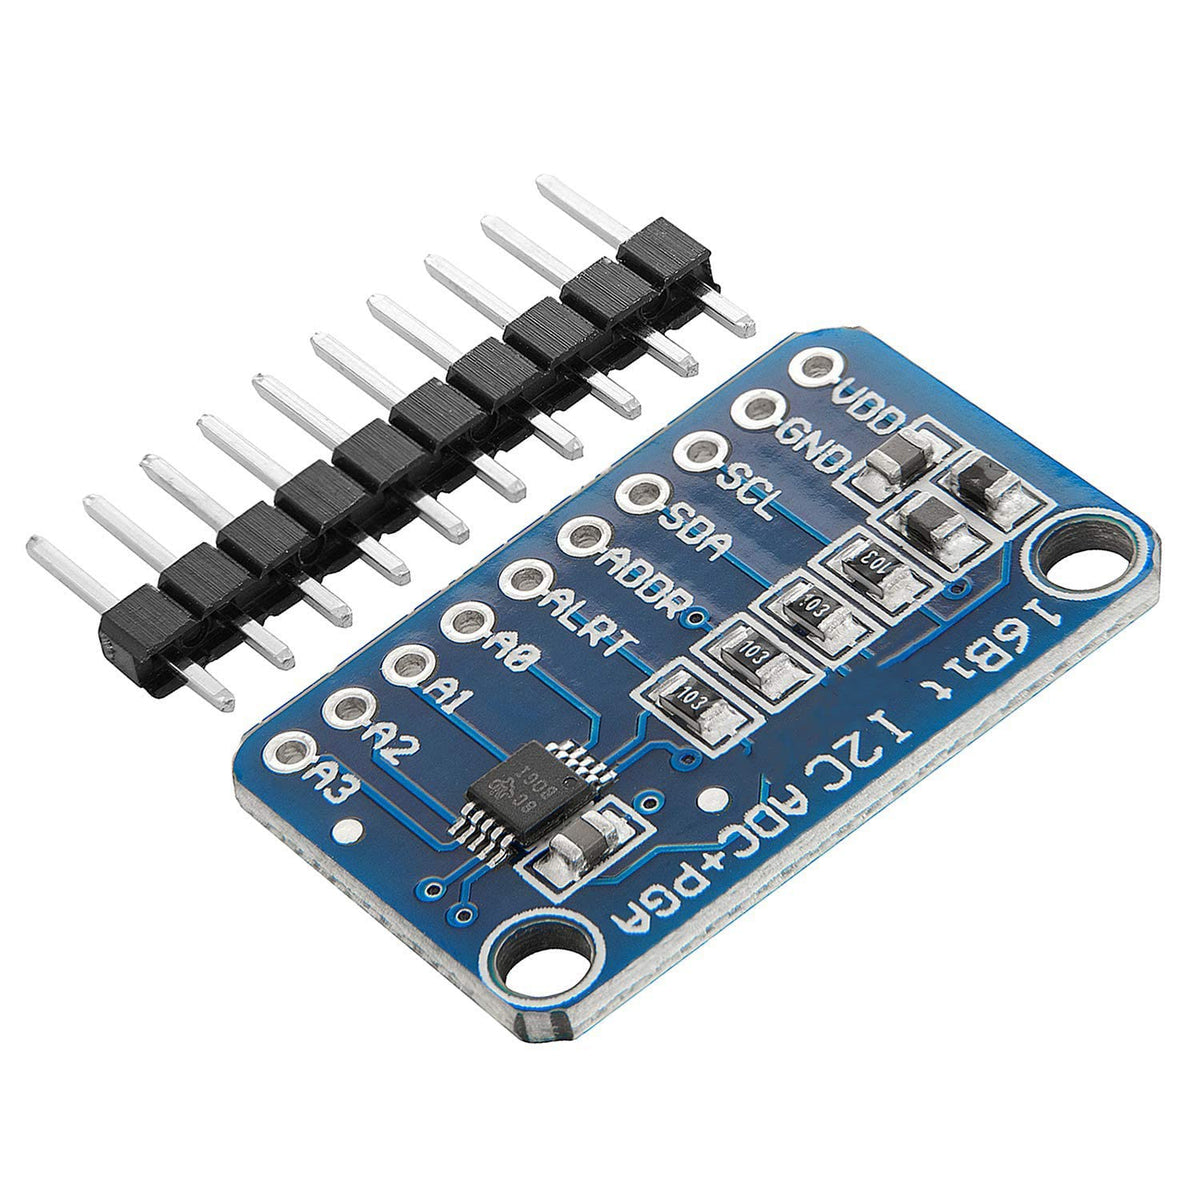 AZDelivery ADS1115 ADC Analog to Digital Converter 16bit 4-Channel Module compatible with Arduino and Raspberry Pi including E-Book!